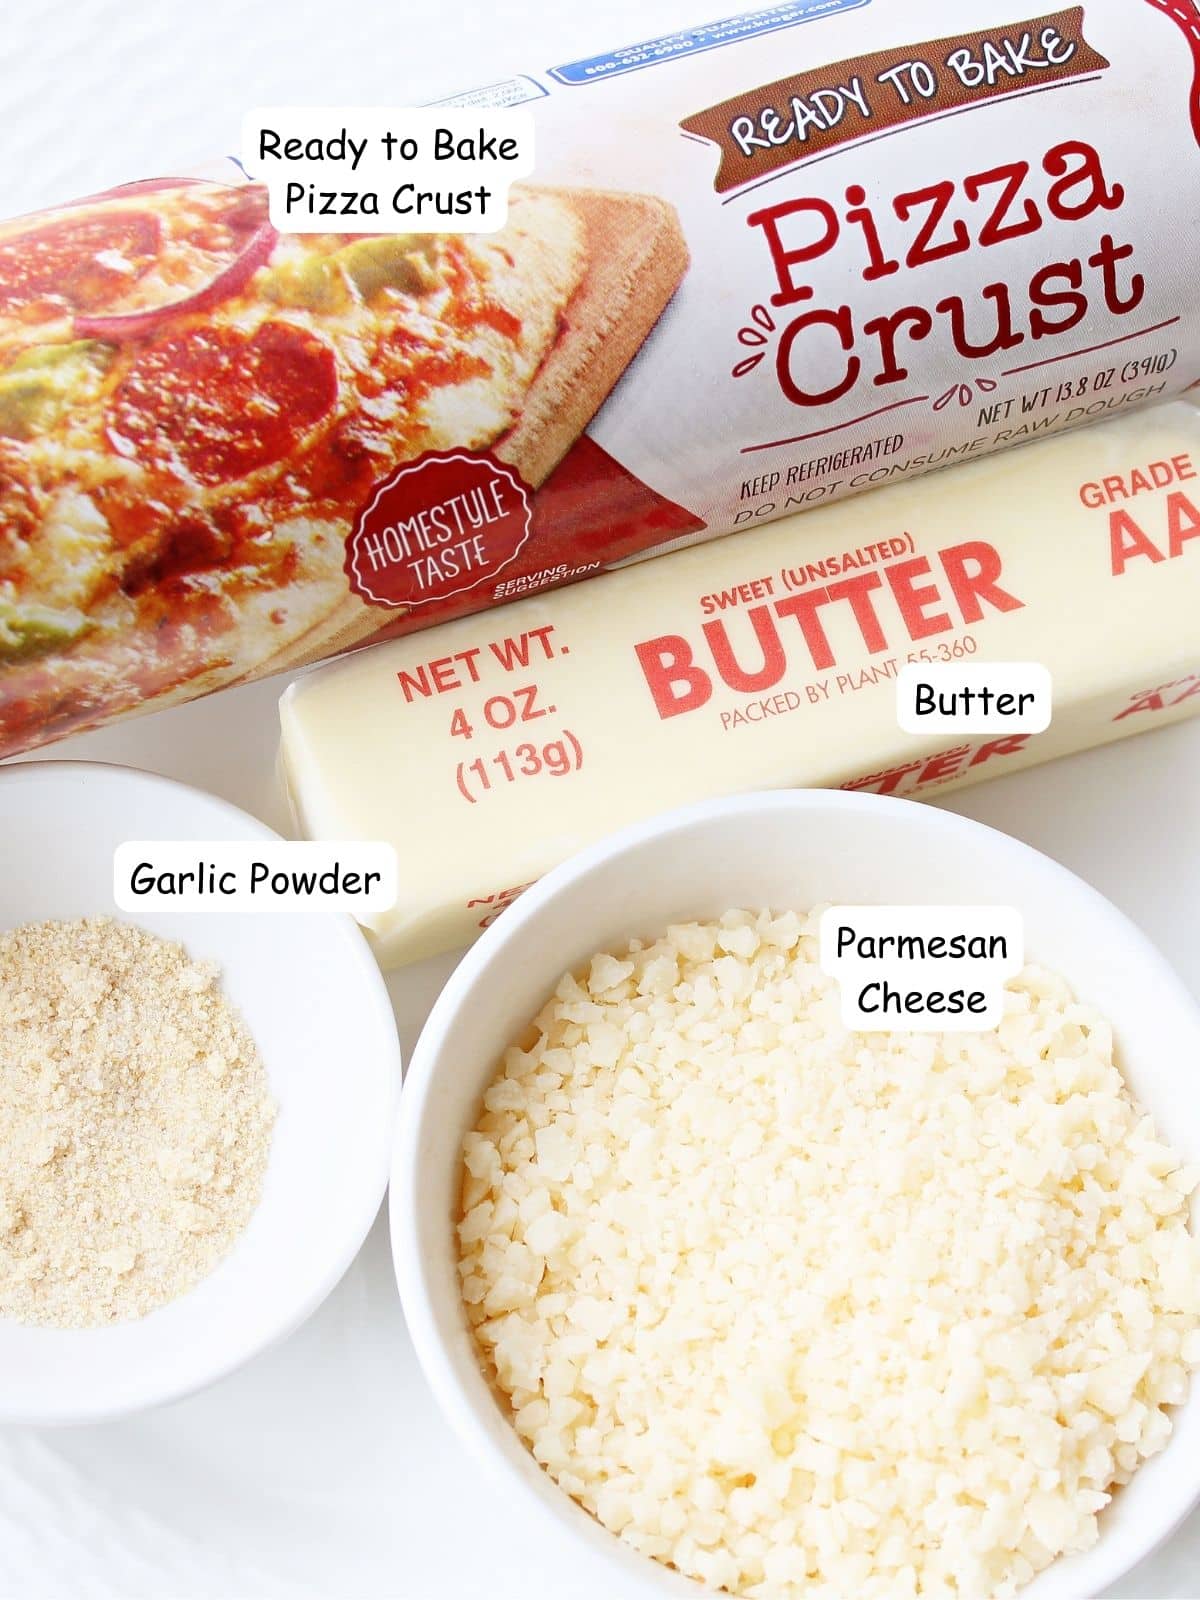 Ingredients Parmesan cheese, garlic powders, sticks of butter and refrigerator pizza dough.